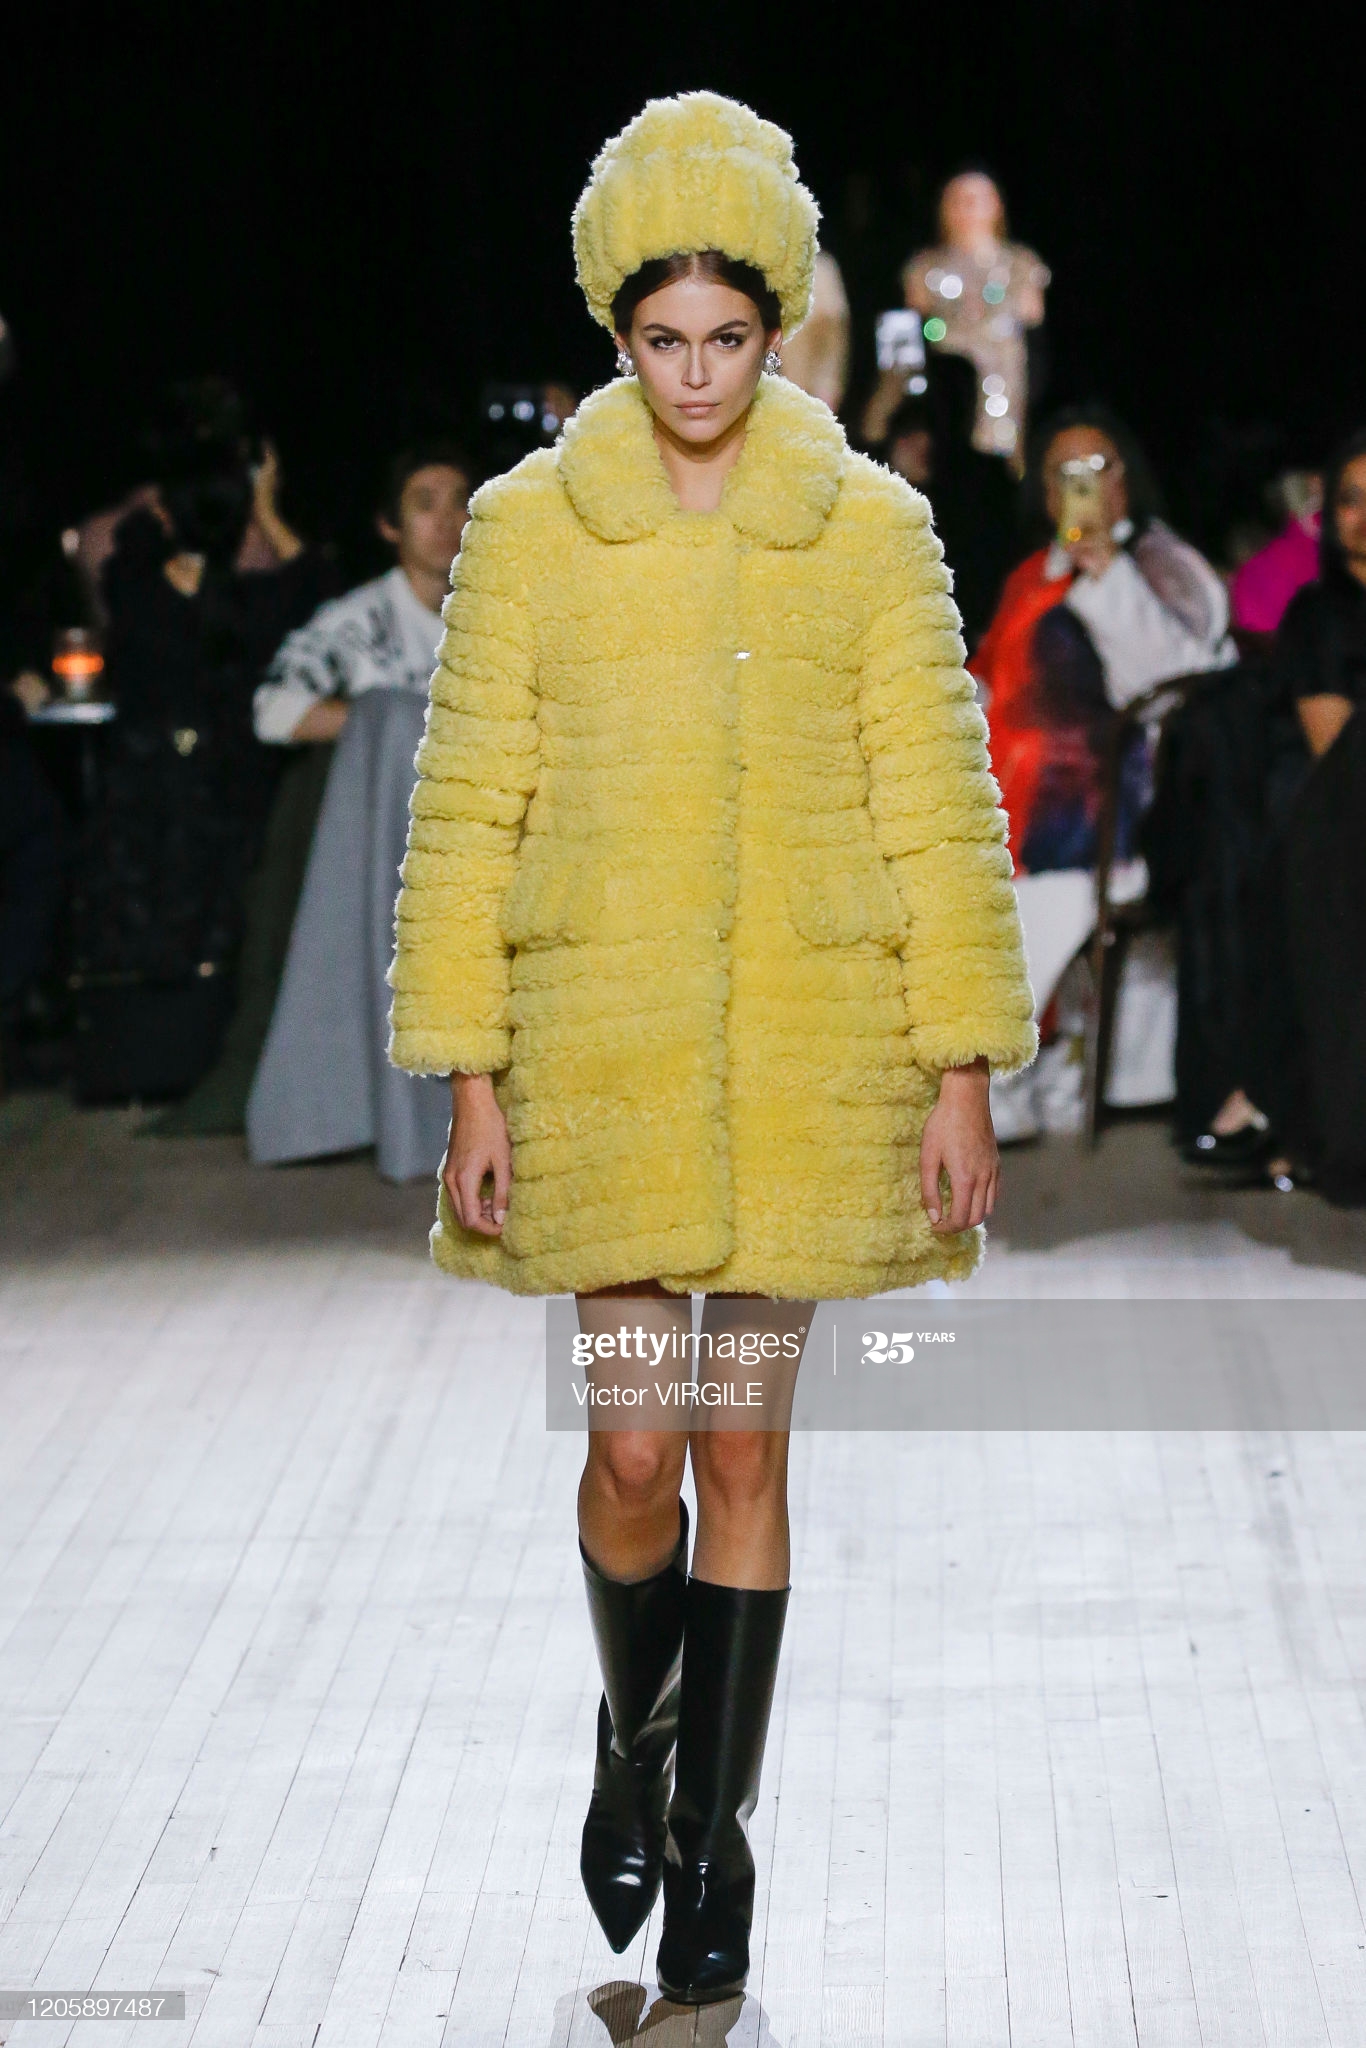 NEW YORK, NEW YORK - FEBRUARY 12: Kaia Gerber walks the runway at the Marc Jacobs Ready to Wear Fall/Winter 2020-2021 fashion show during New York Fashion Week on February 12, 2020 in New York City. (Photo by Victor VIRGILE/Gamma-Rapho via Getty Images)